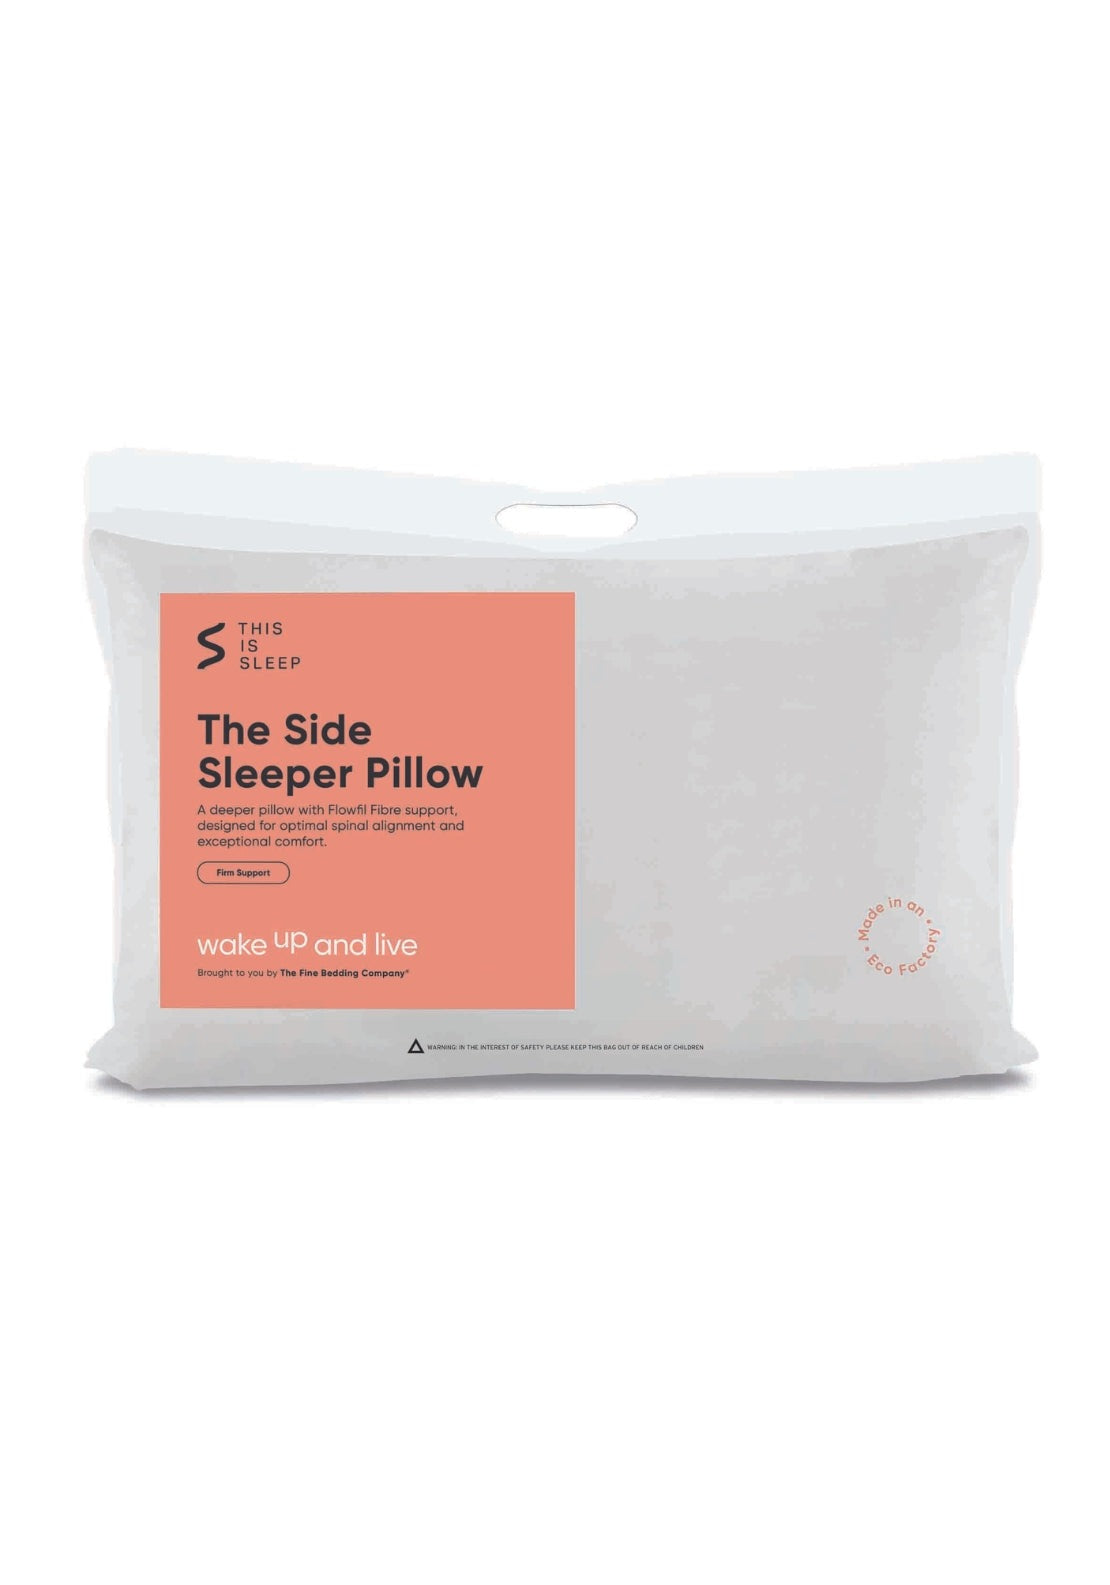 The Fine Bedding Company Side Sleeper Pillow 1 Shaws Department Stores